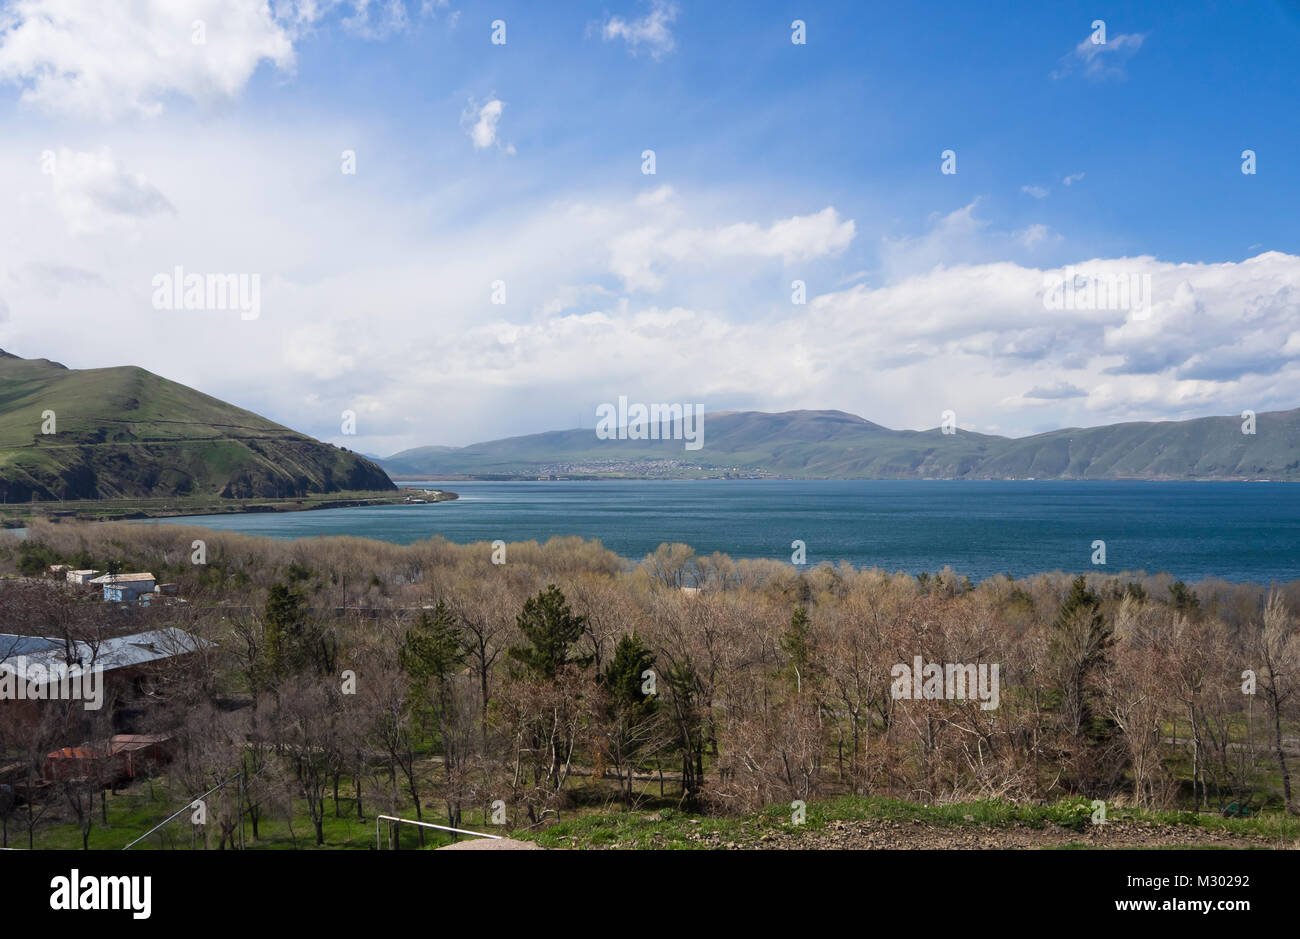 Lake Sevan in Armenia at an altitude of altitude of 1,900 m, the largest fresh water reserve in the area, panorama view, shoreline, trees and hills Stock Photo